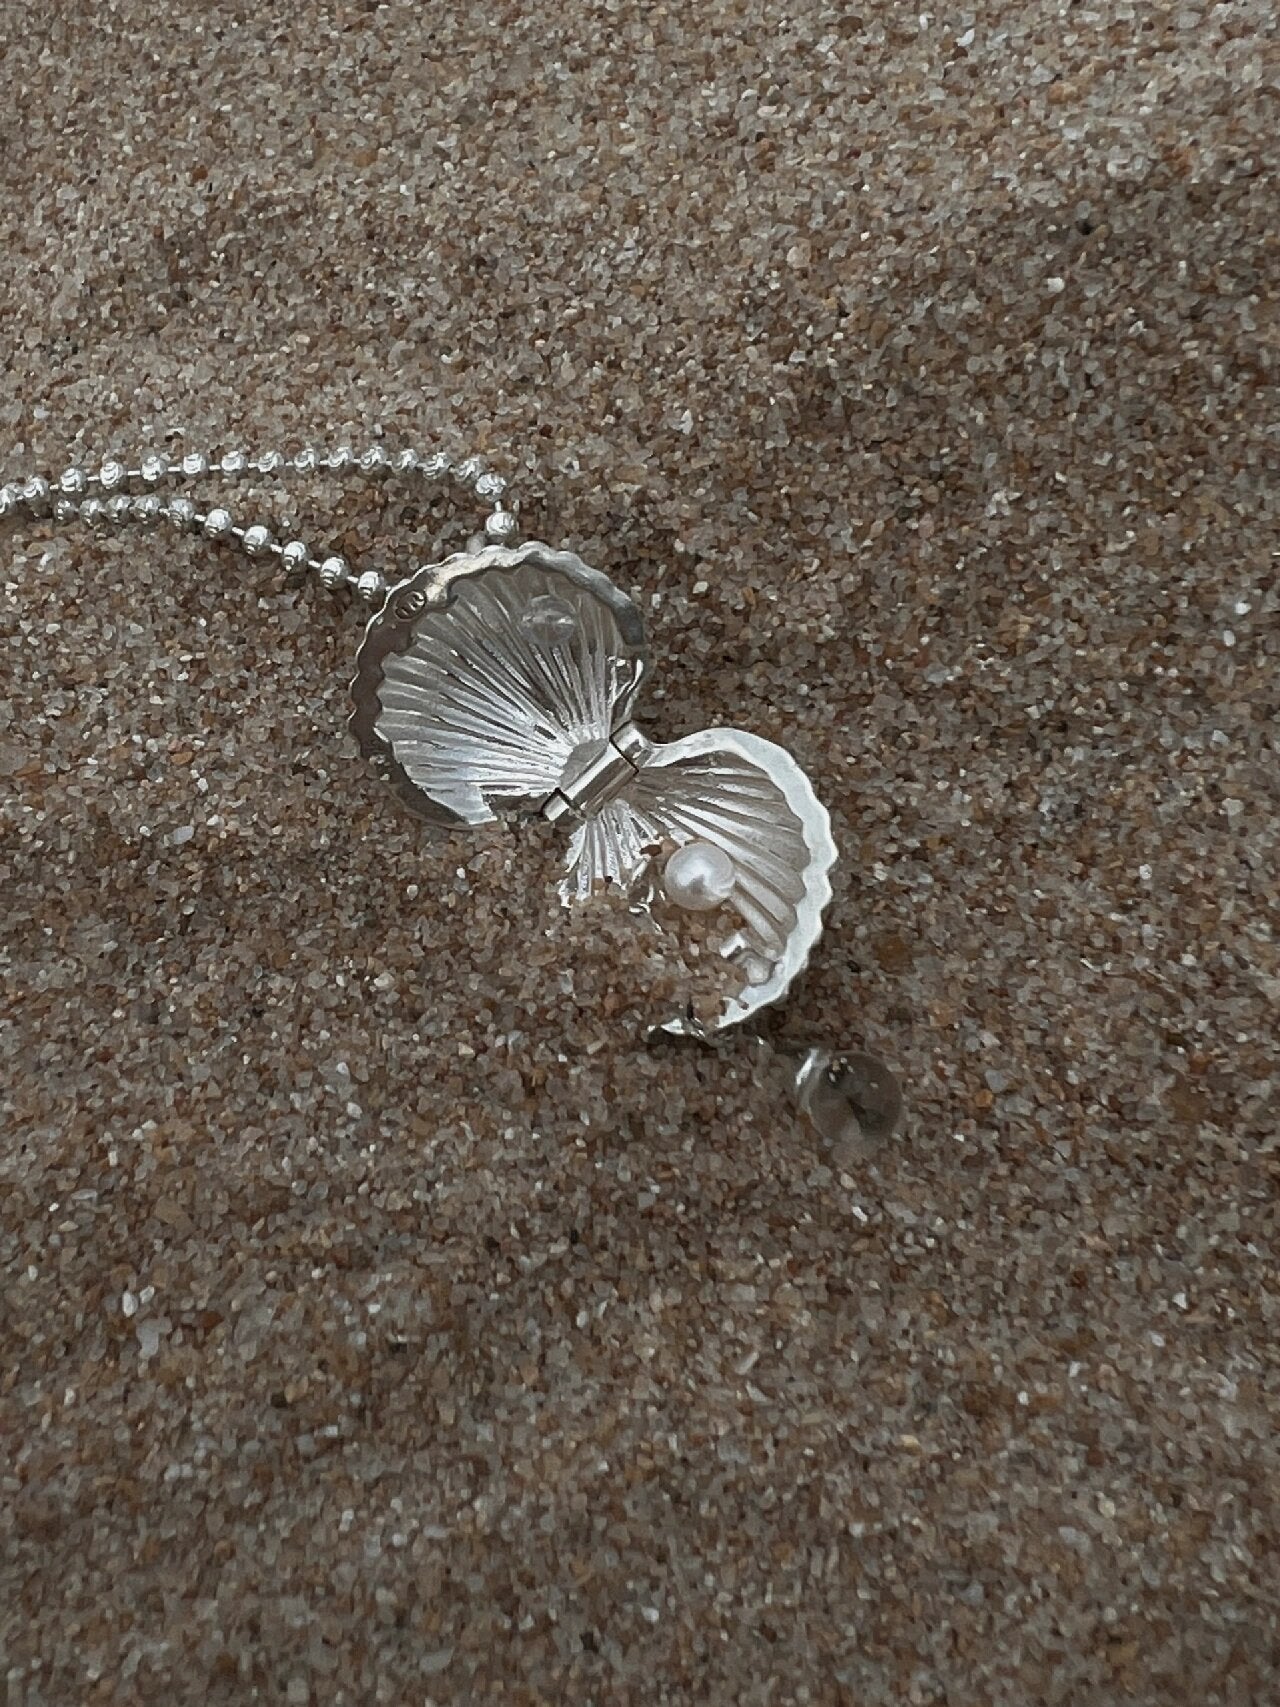 Shell Pearl Crystal Necklace